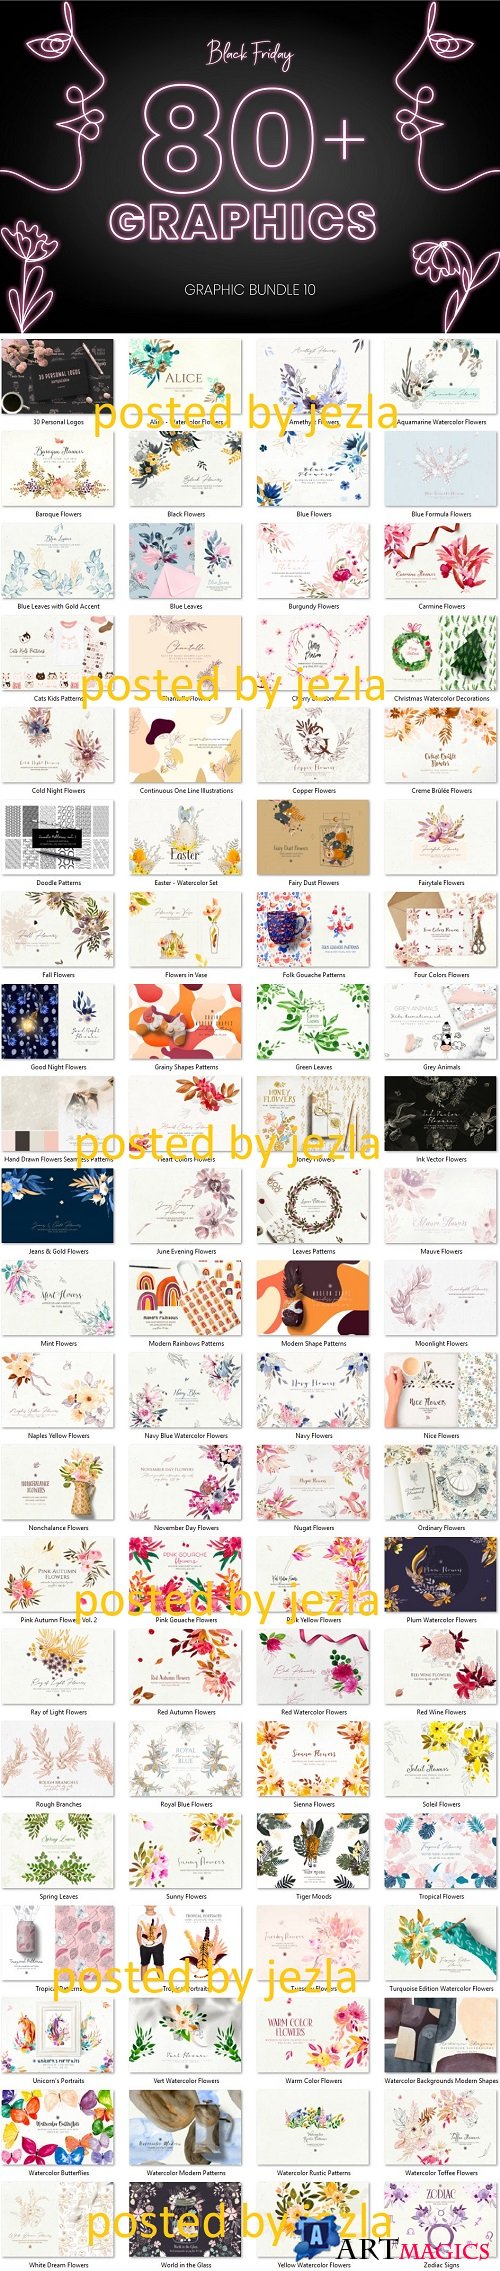 Black Friday Graphic Bundle 10 - Flowers, Decorations, Decorations, Seamless Patterns